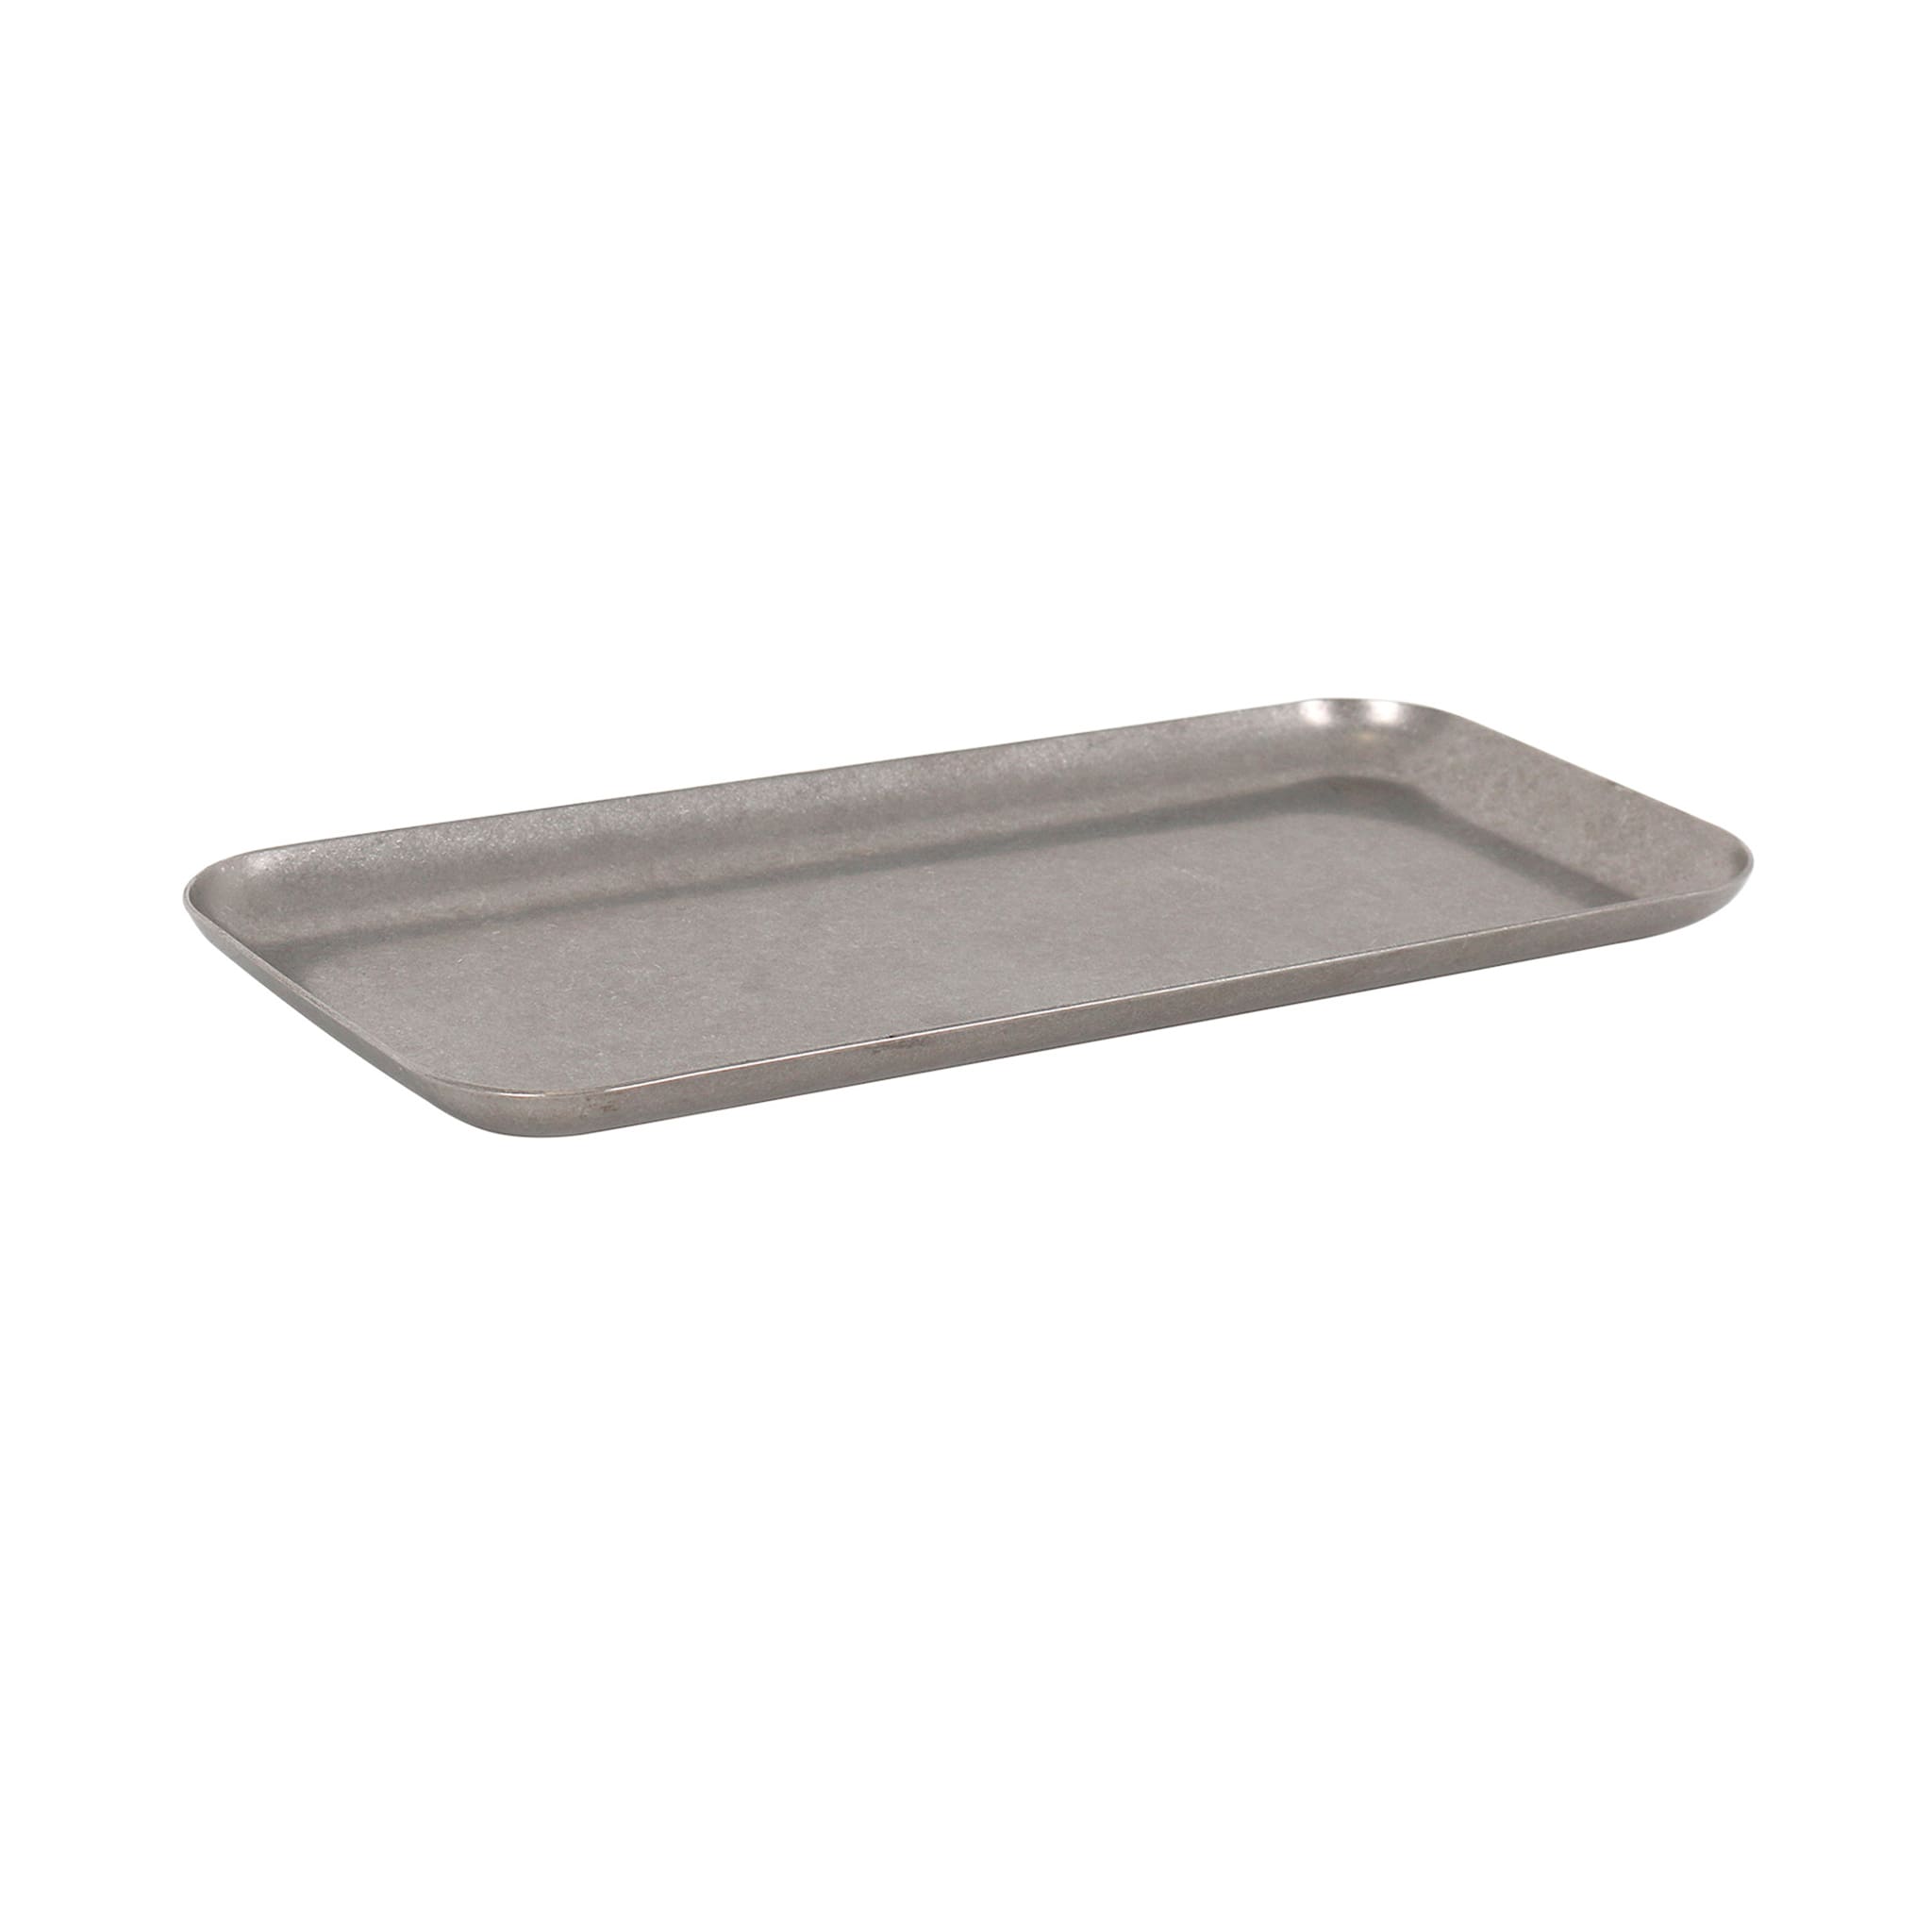 Vintage Style Stainless Steel Rectangular Serving Tray, 19.5x8.5cm